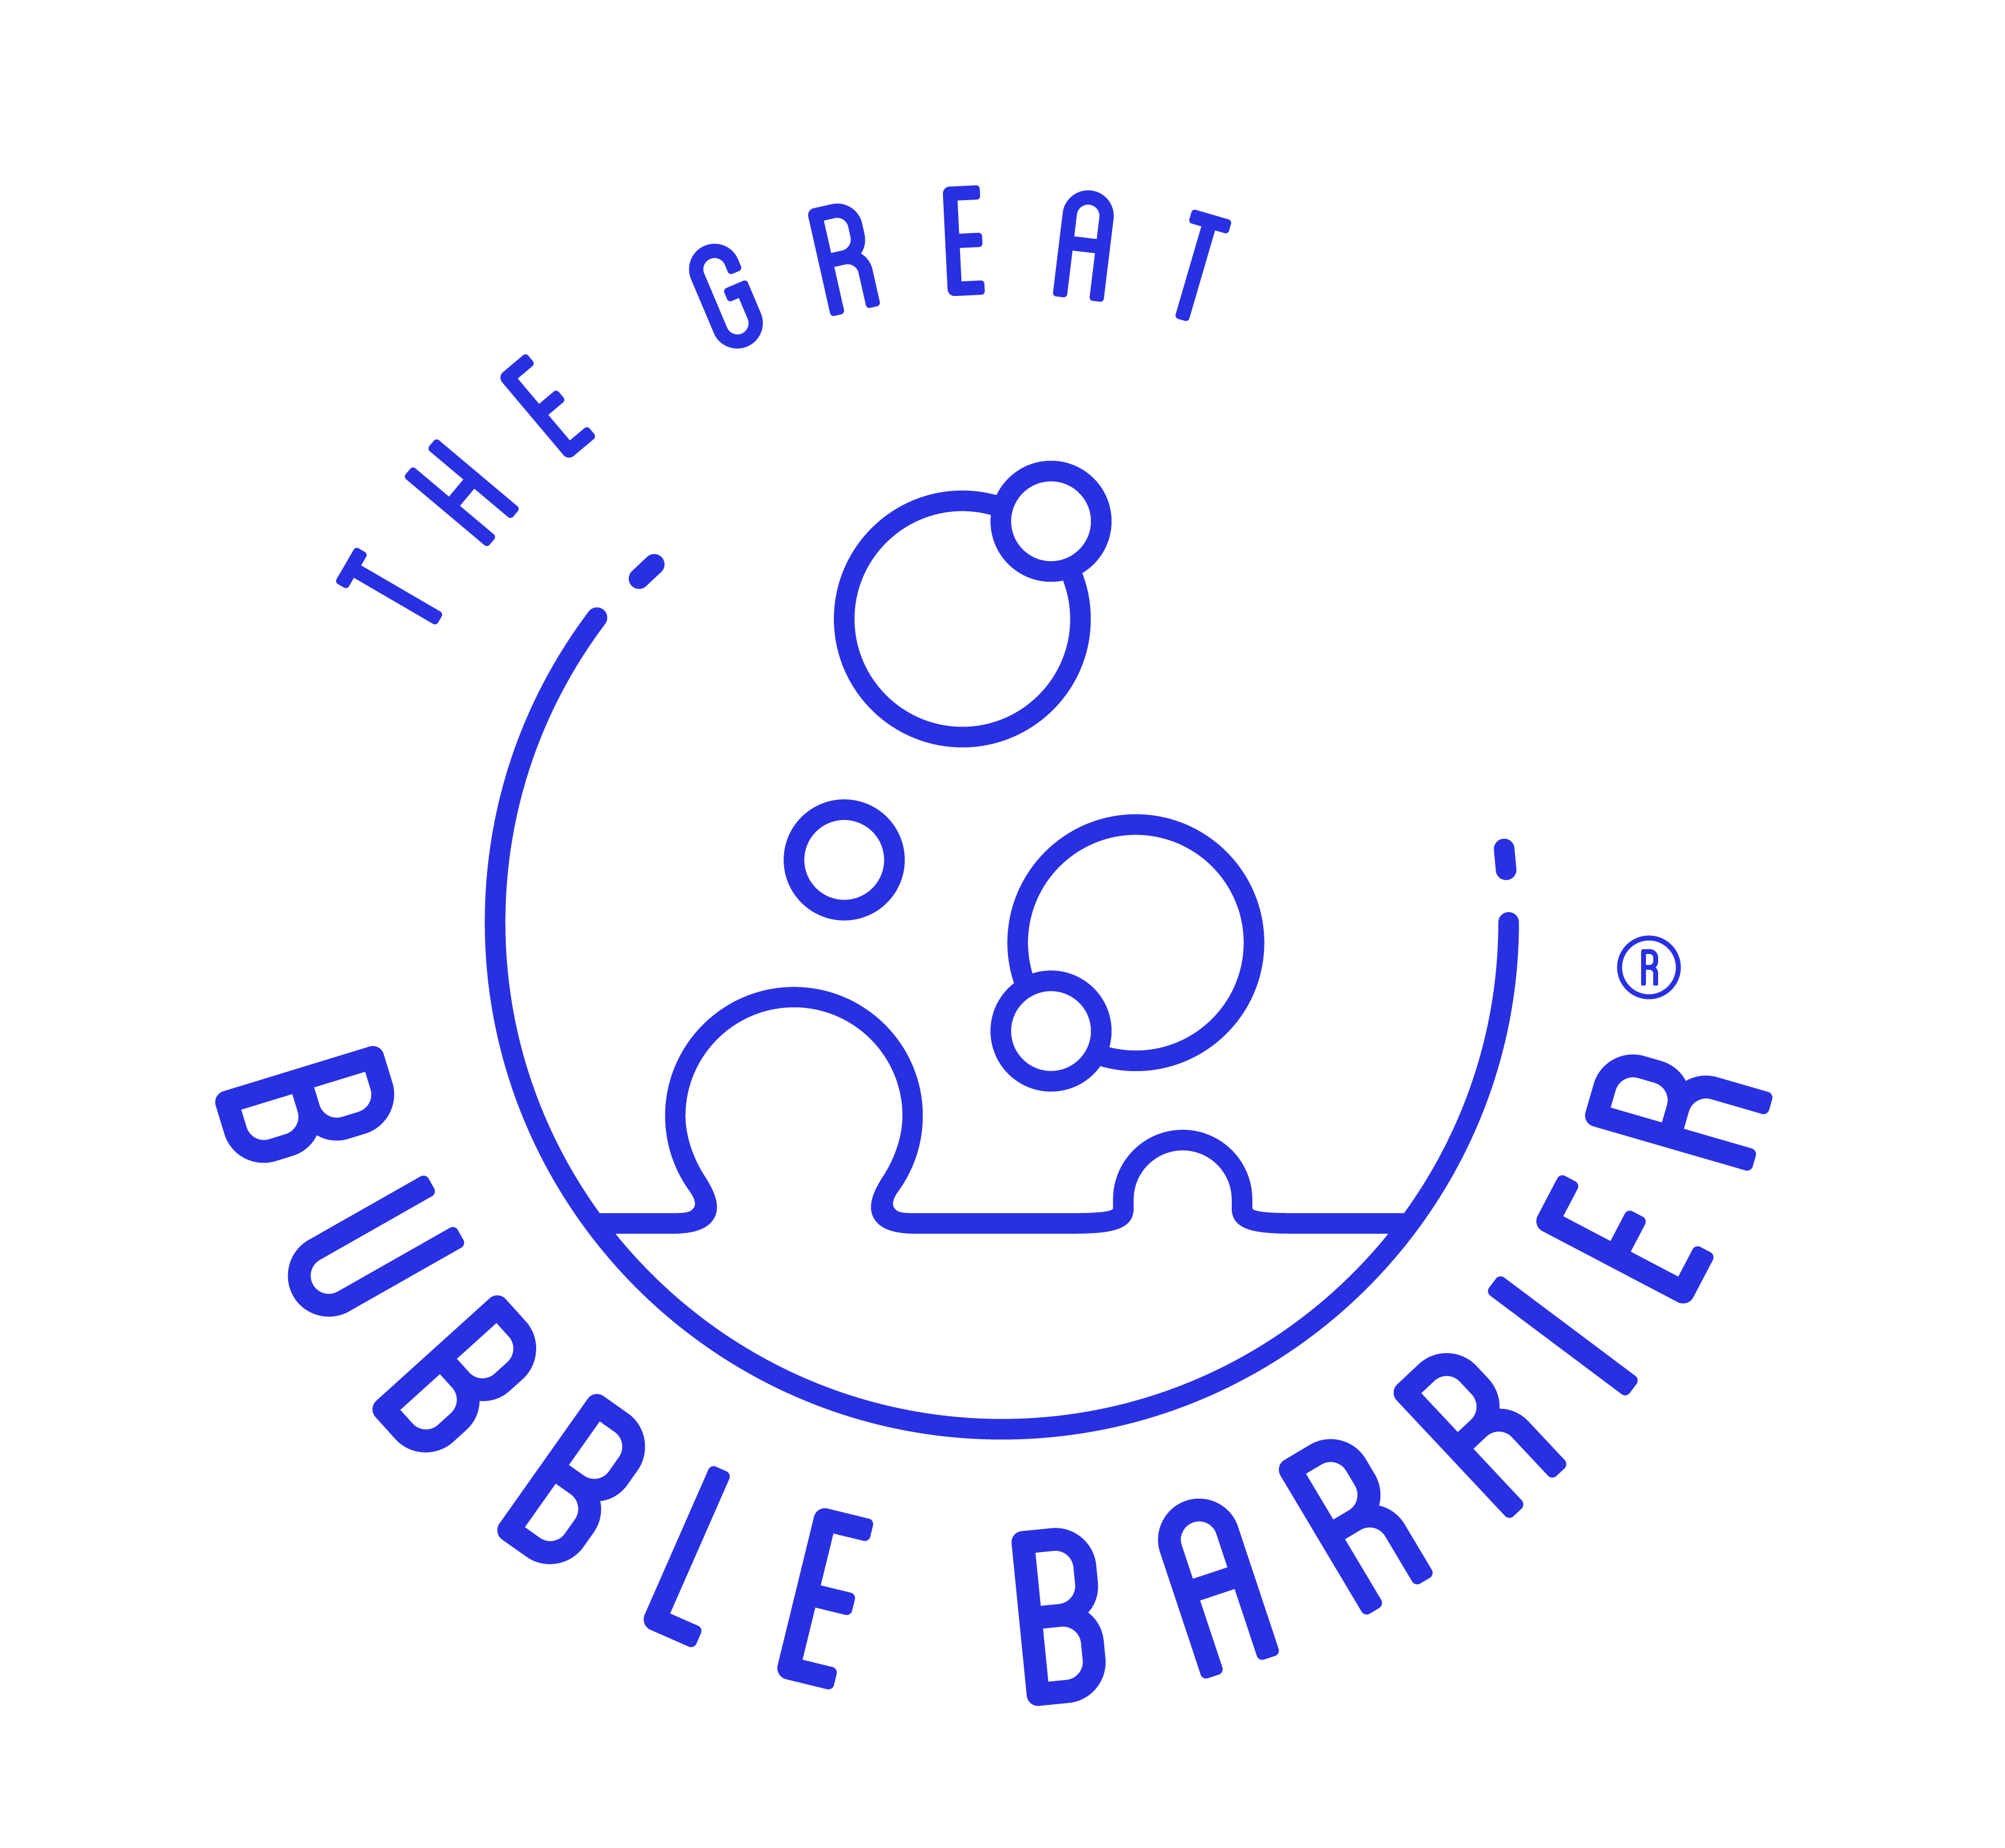 The great bubble barrier